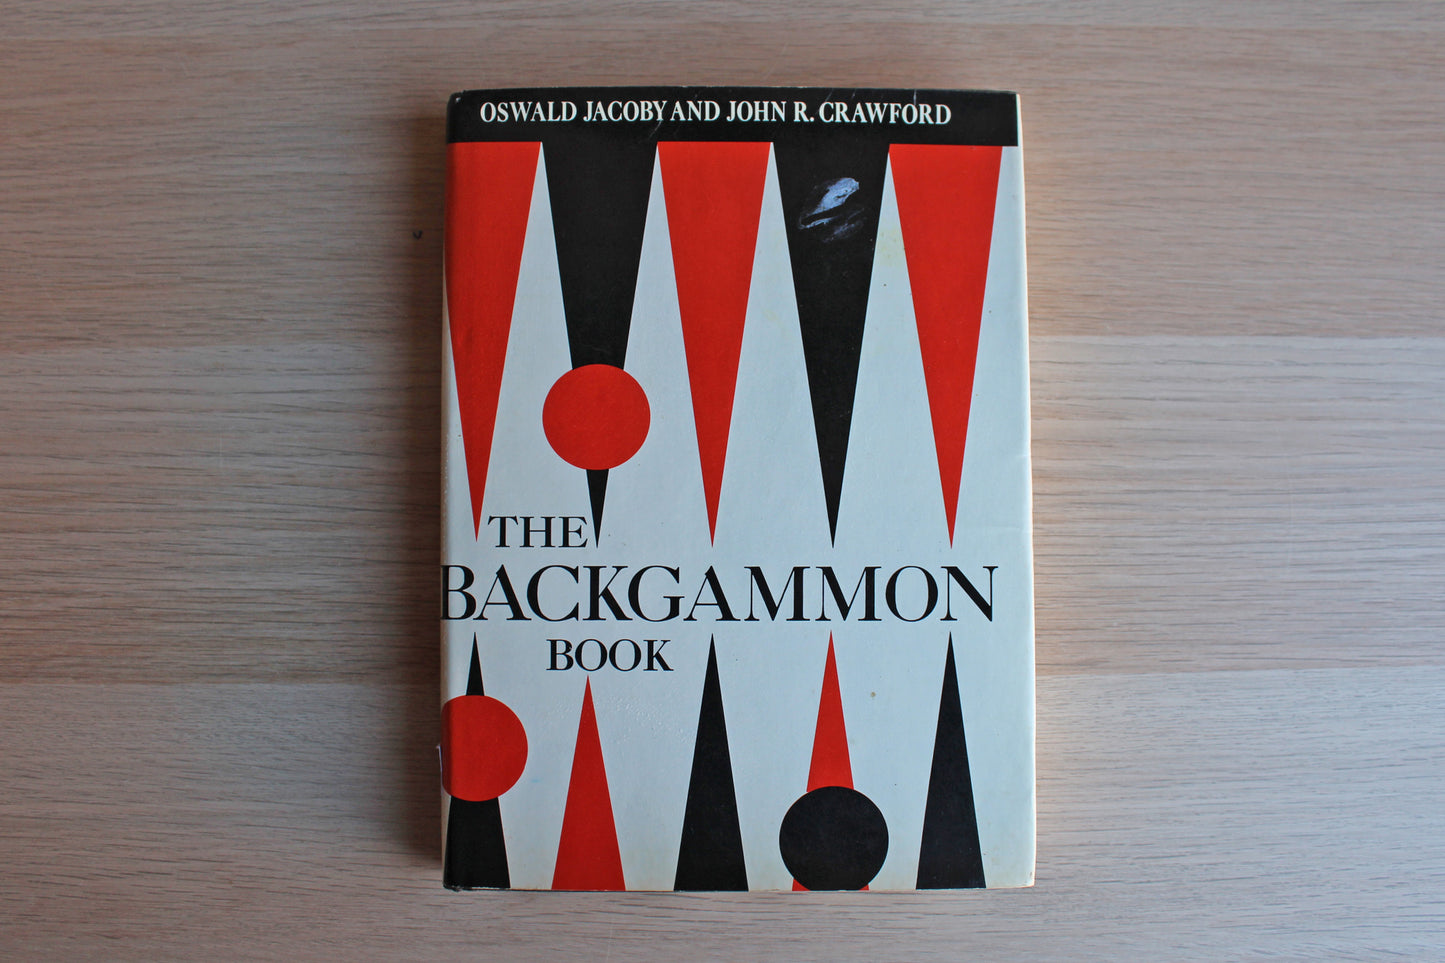 The Backgammon Book by Oswald Jacoby and John R. Crawford